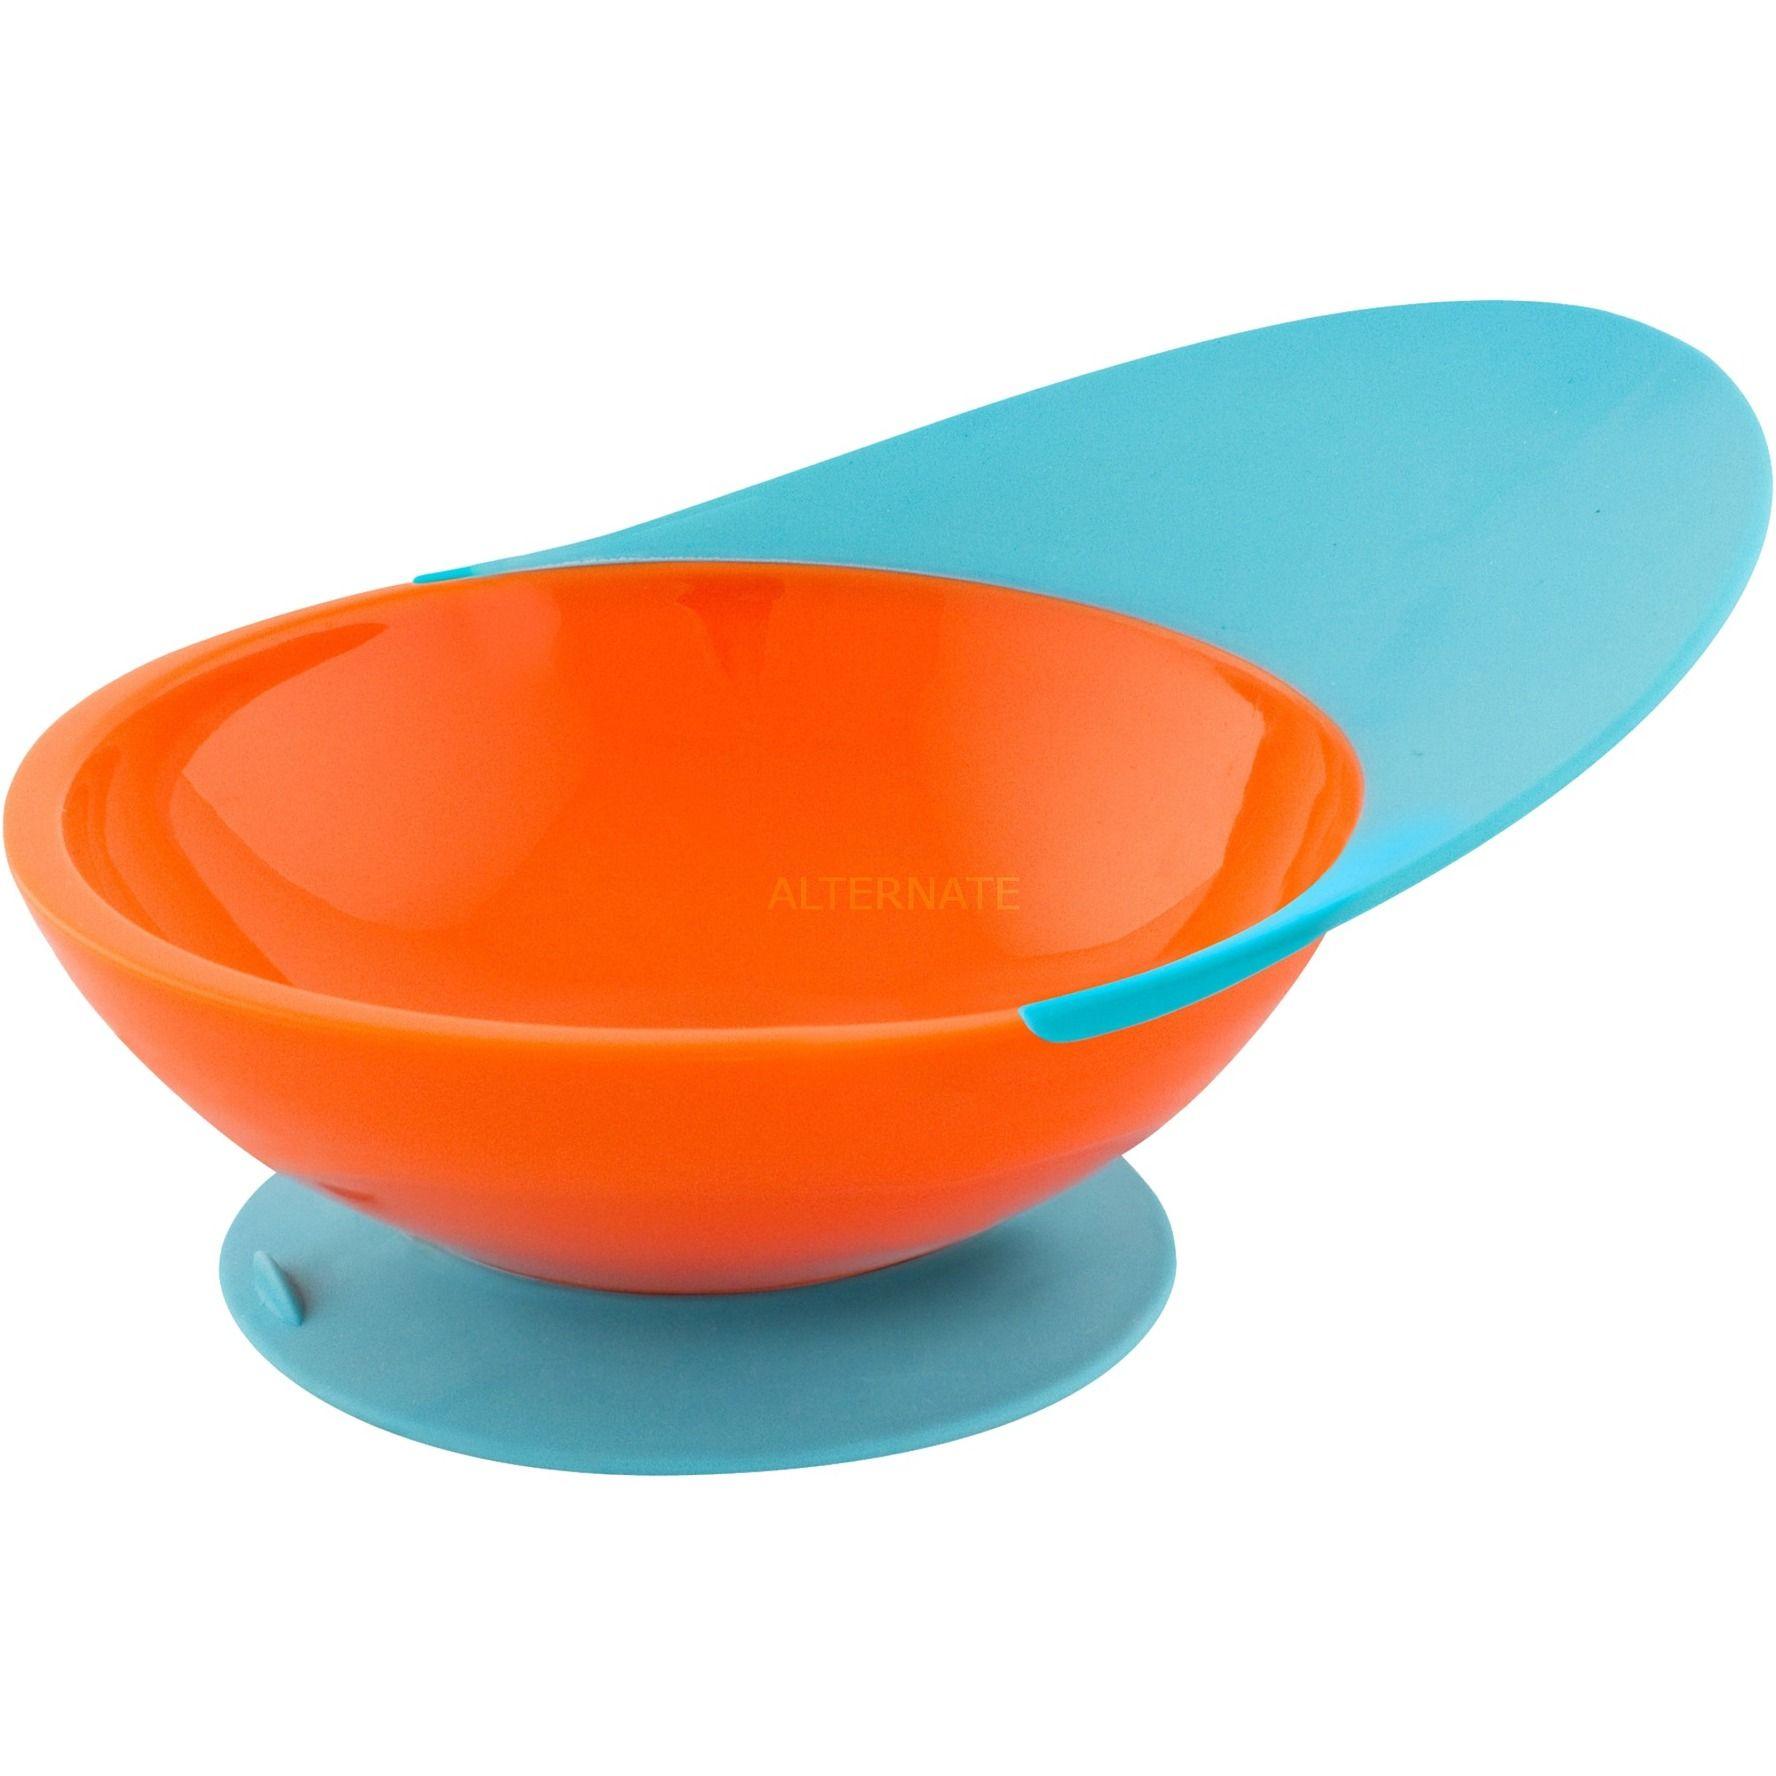 Orange and Blue 76 Logo - Tomy Catch Bowl 9month(s) Blue,Orange, Dishes blue/orange, Blue ...